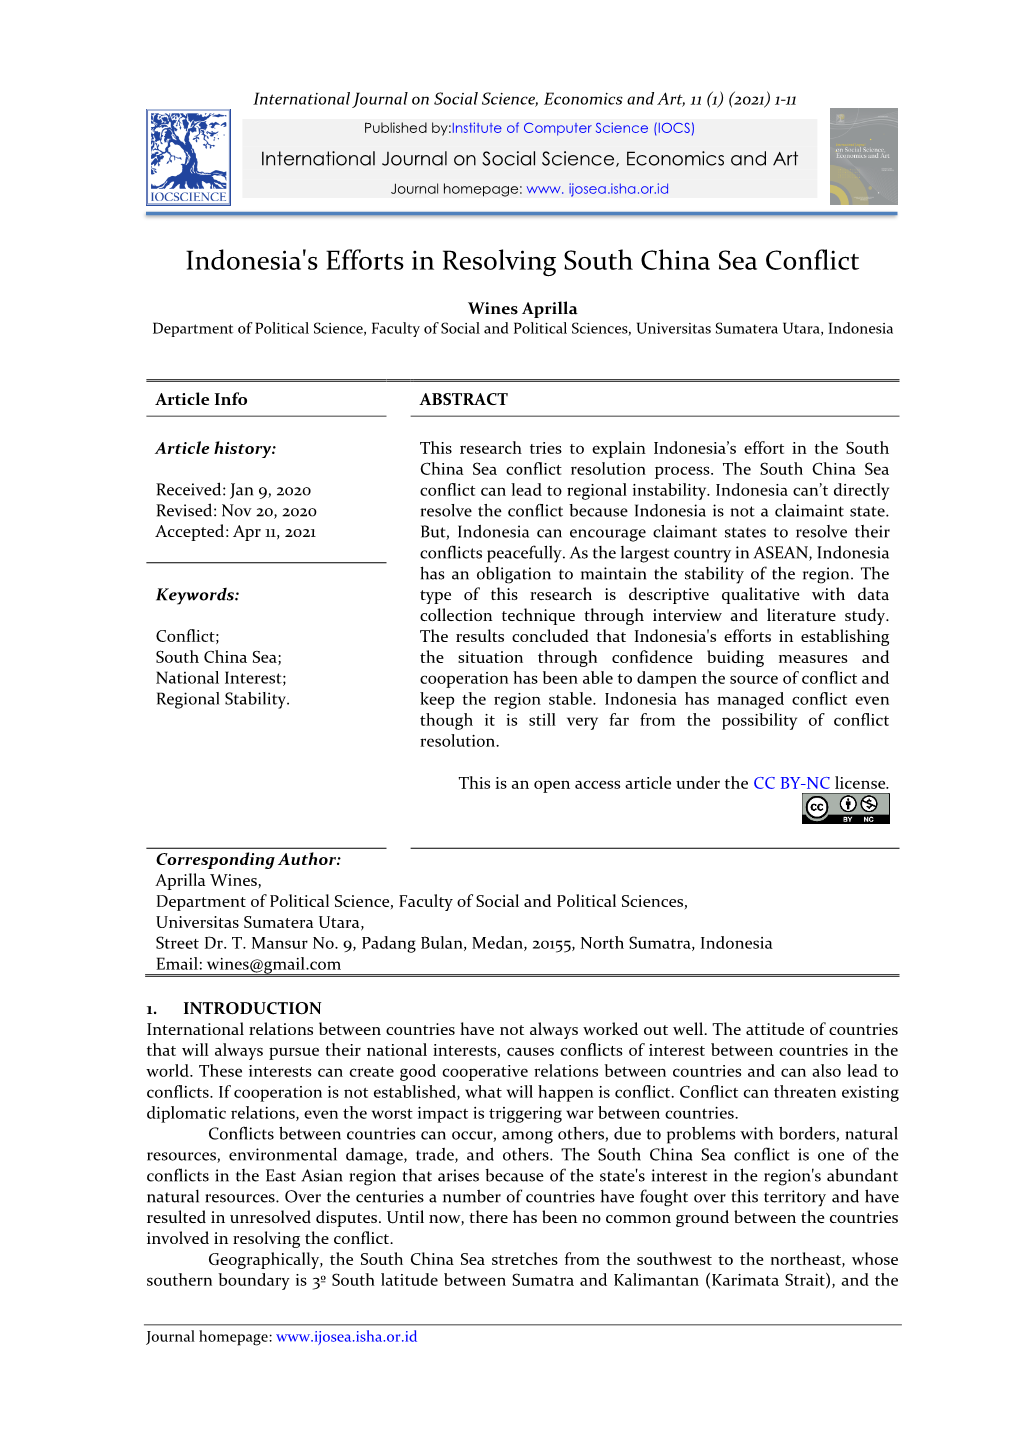 Indonesia's Efforts in Resolving South China Sea Conflict